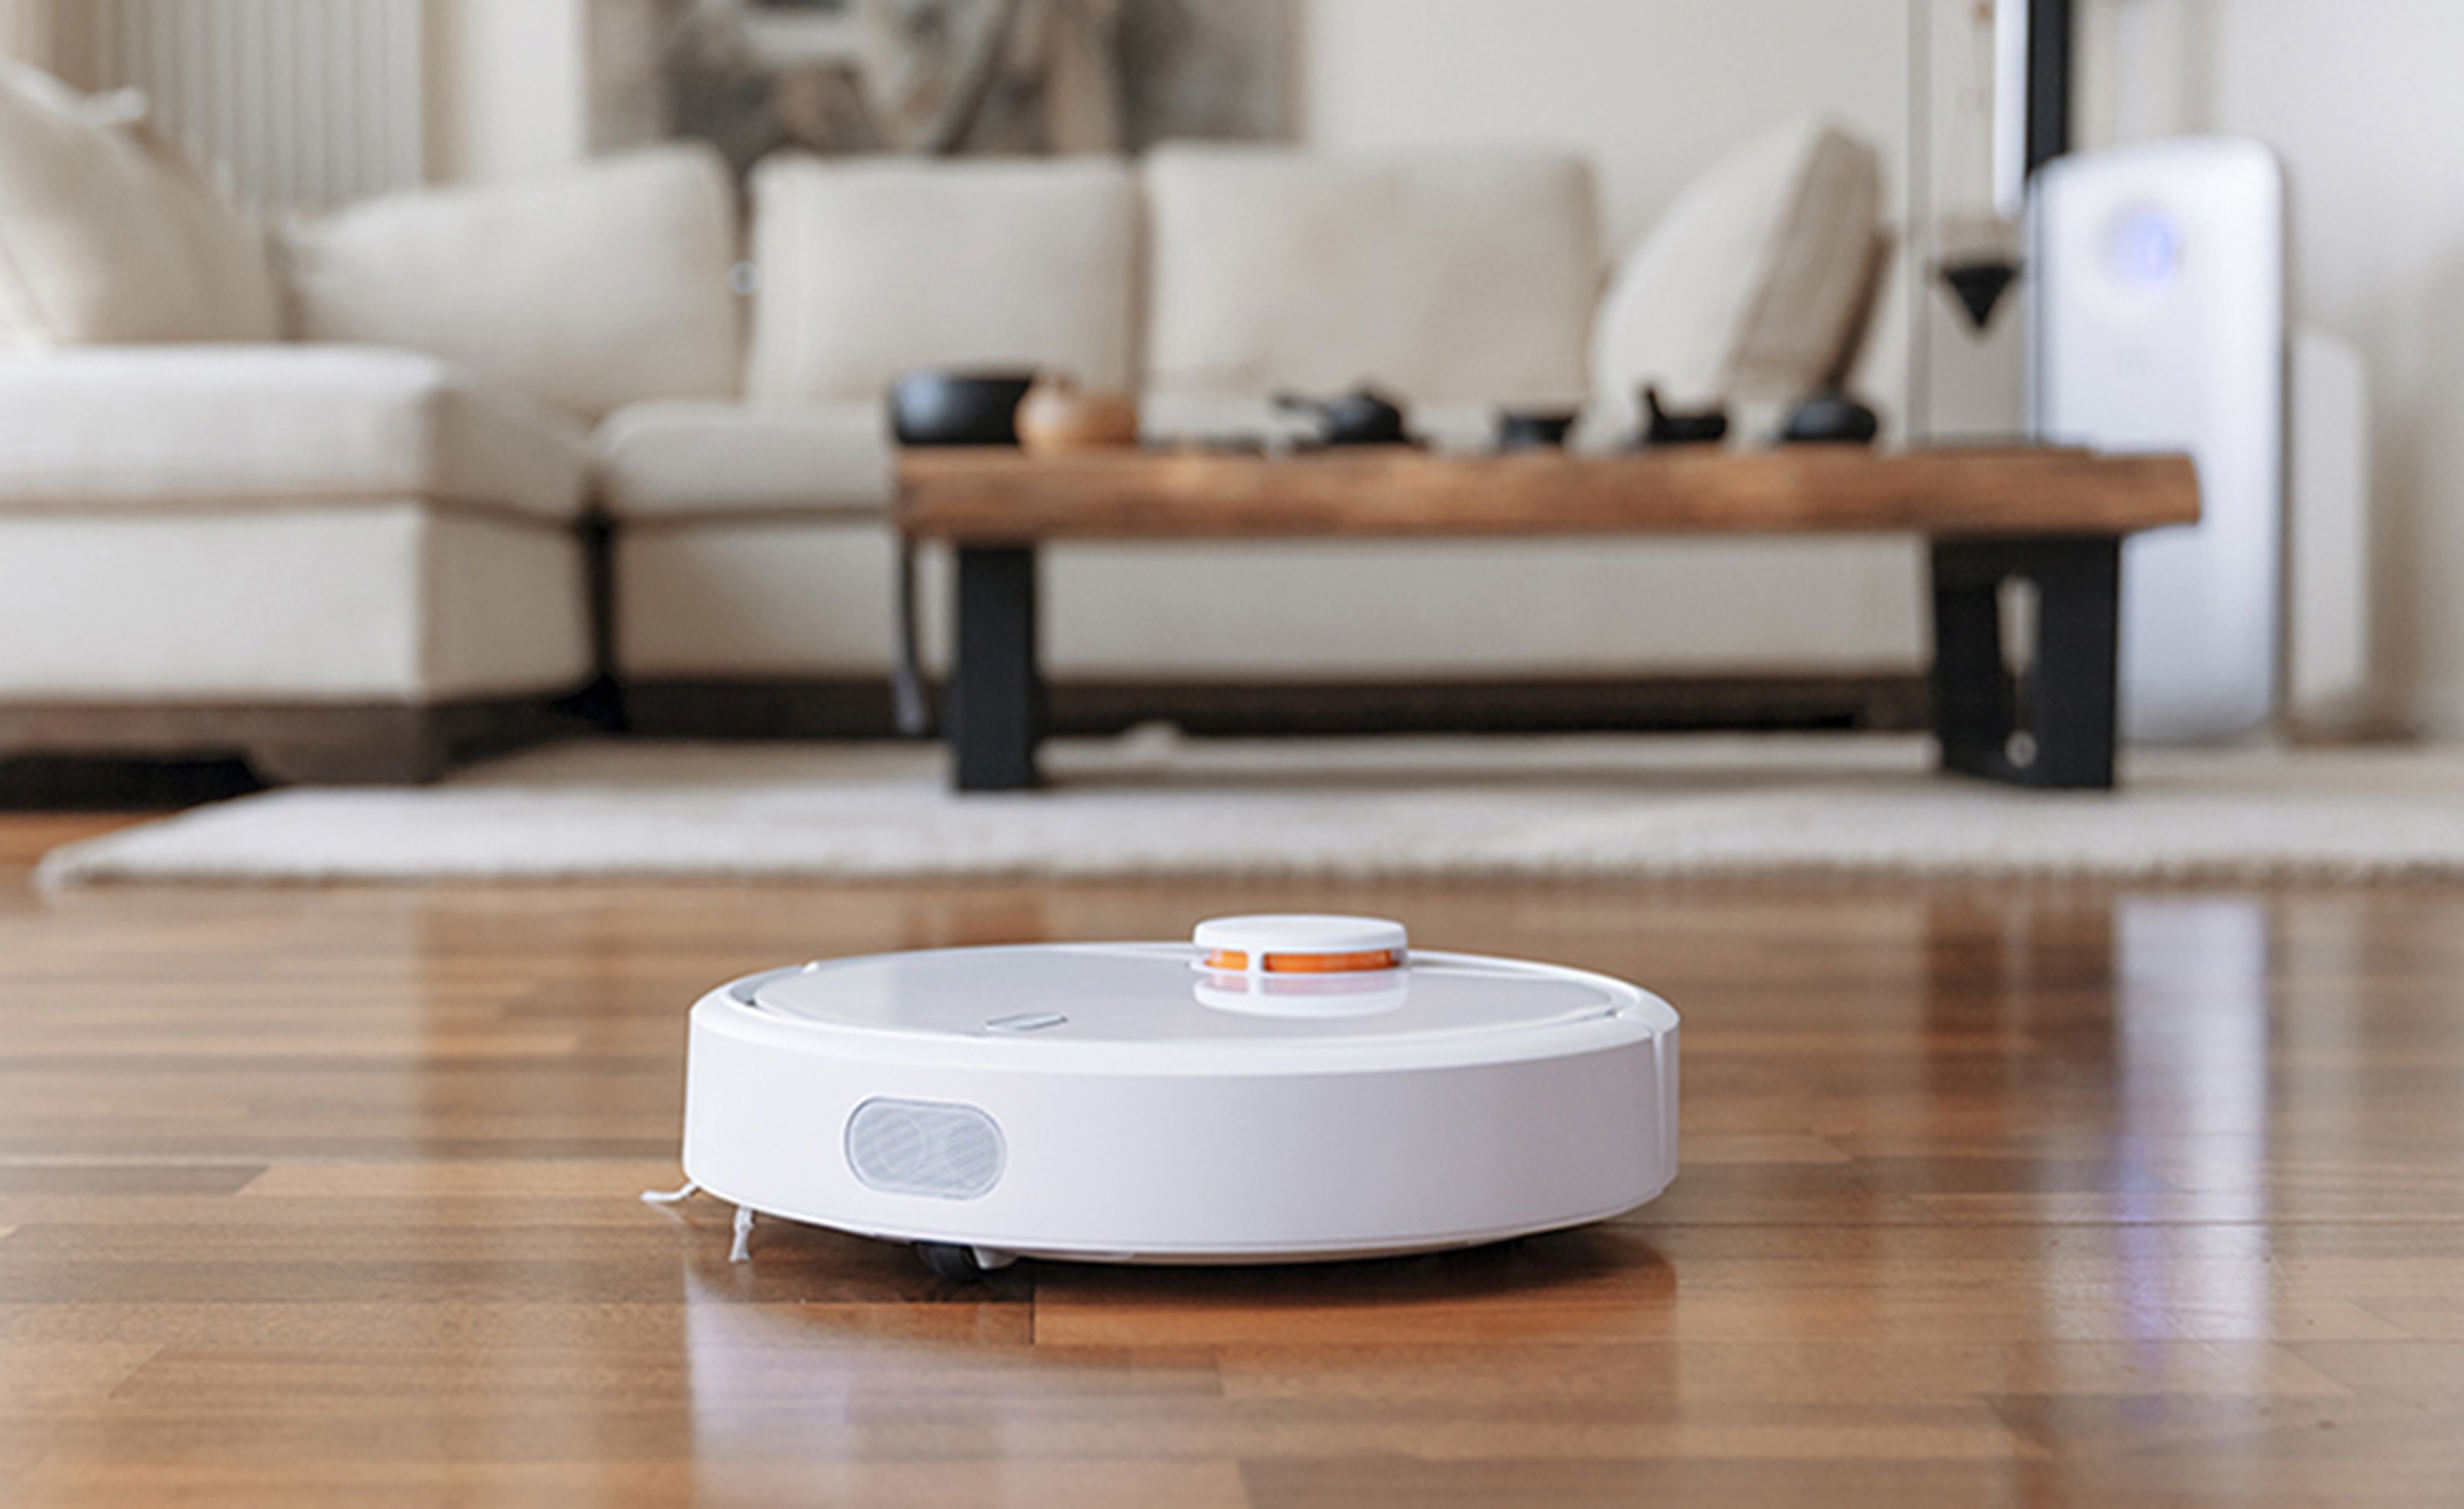 Xiaomi’s robot vacuum cleaner, one of five household gadgets to make your life easier. Photo: courtesy of Xiaomi